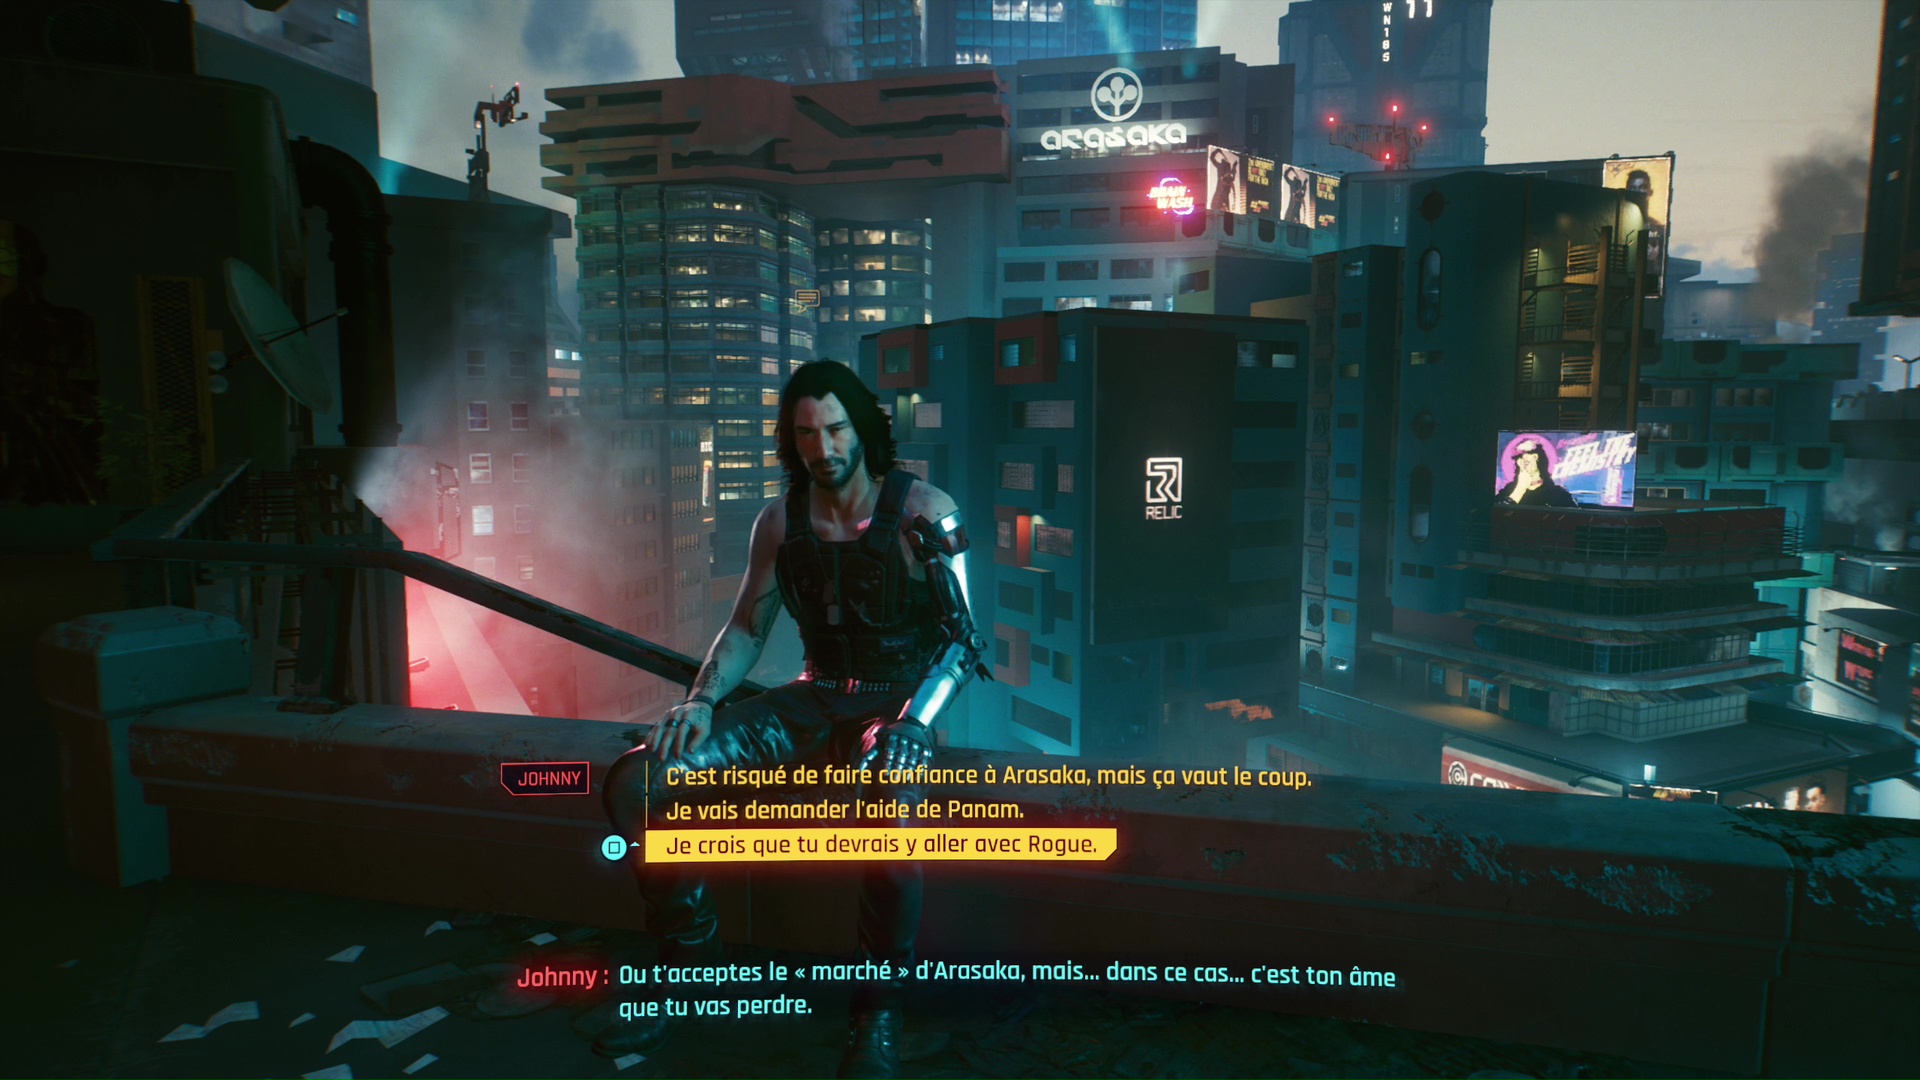 cyberpunk-2077-guide-choix-histoire-consequences-differences-fins-soleil